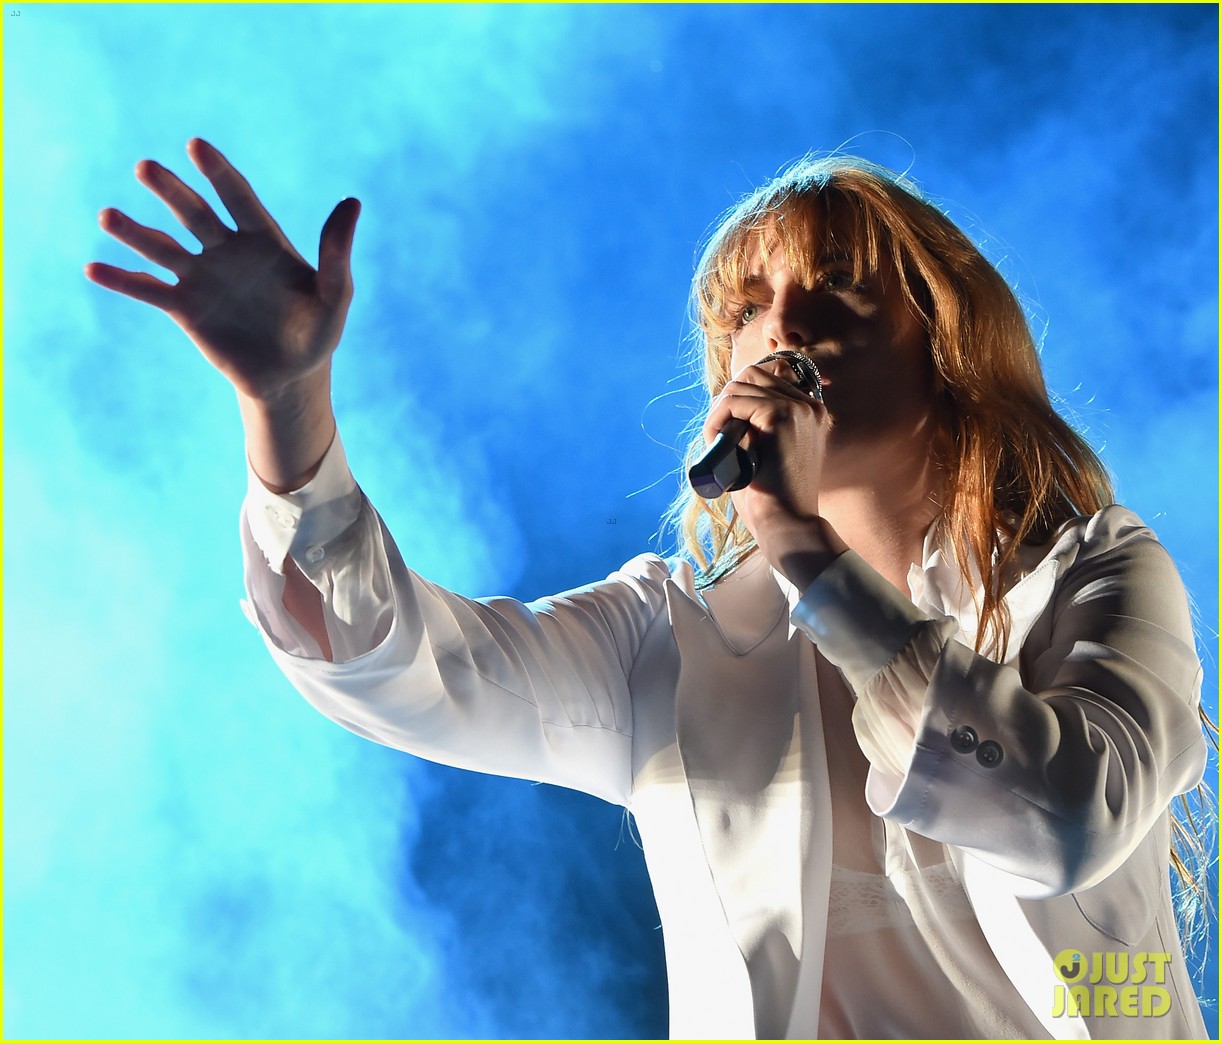 florence the machine premieres ship to wreck music video 10